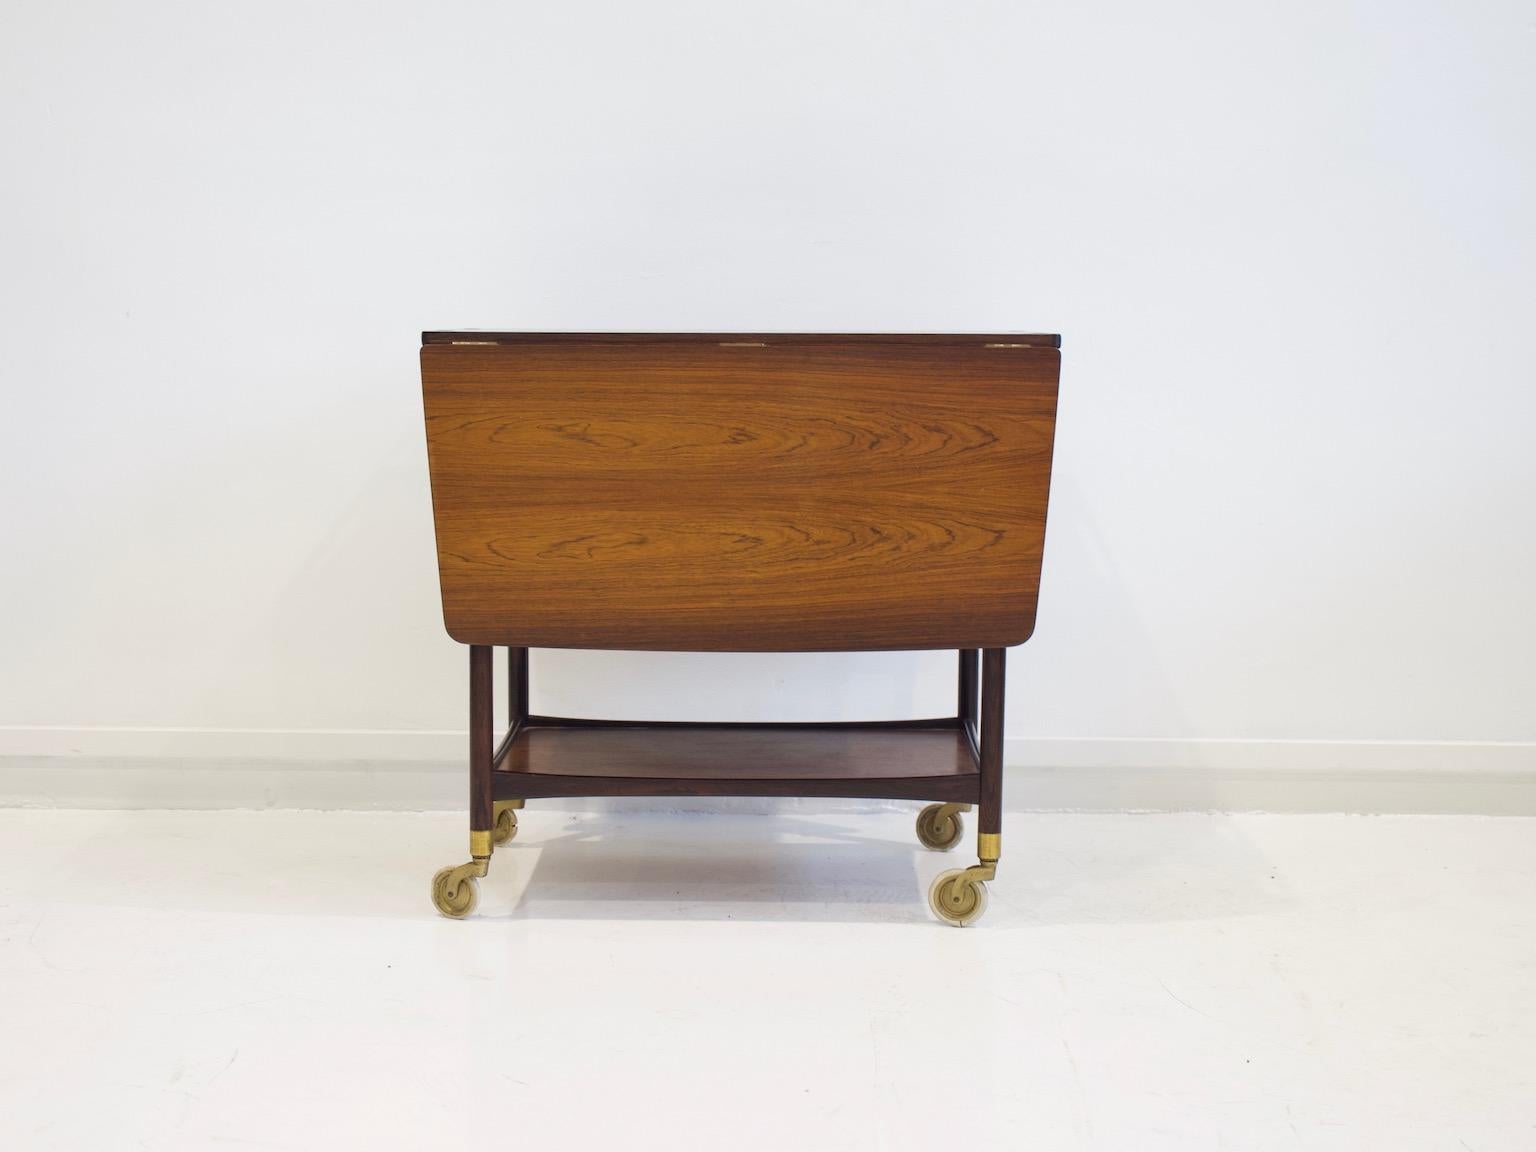 Ludvig Pontoppidan serving cart made of wood with two cloves, top covered with black Formica. Two underlying shelves and a drawer. Set on four brass wheels.
Measurements when the table is open: H 71 cm, W 113 cm, D 75 cm.